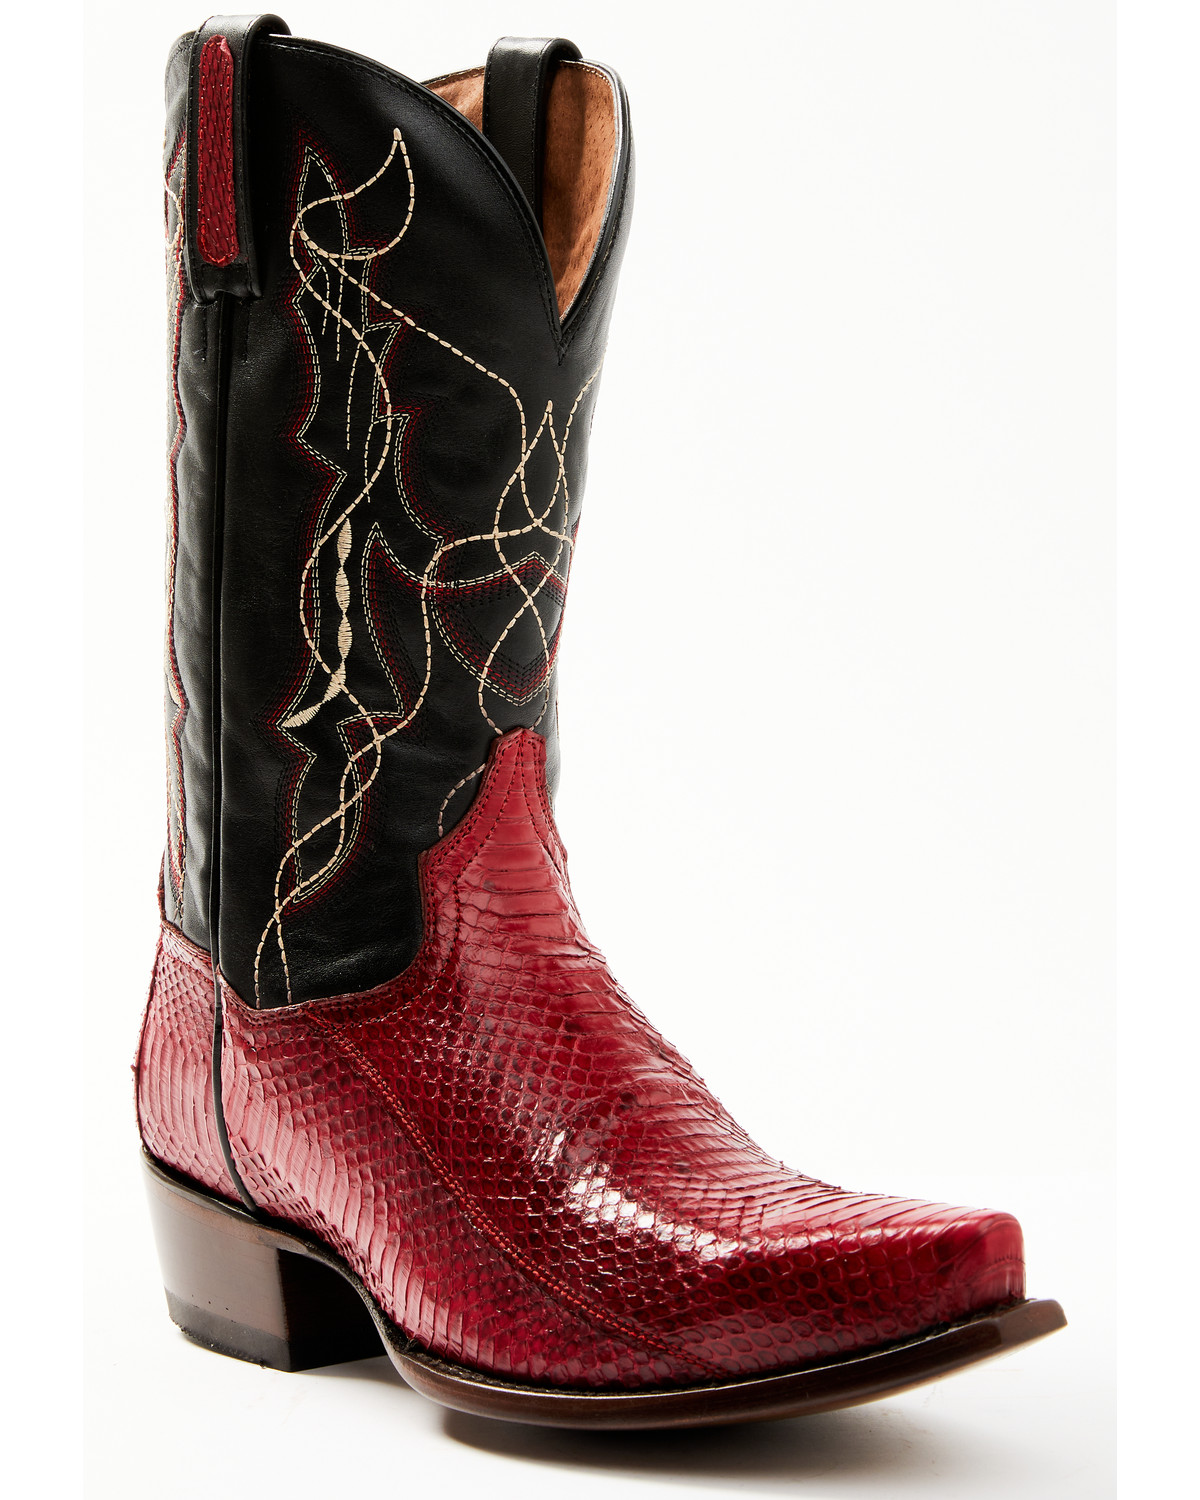 BOTAS VAKERAS Pink/ Hueso 8,9,10 CLEARANCE 70%off WESTERN BOOTS blue s 5,6 